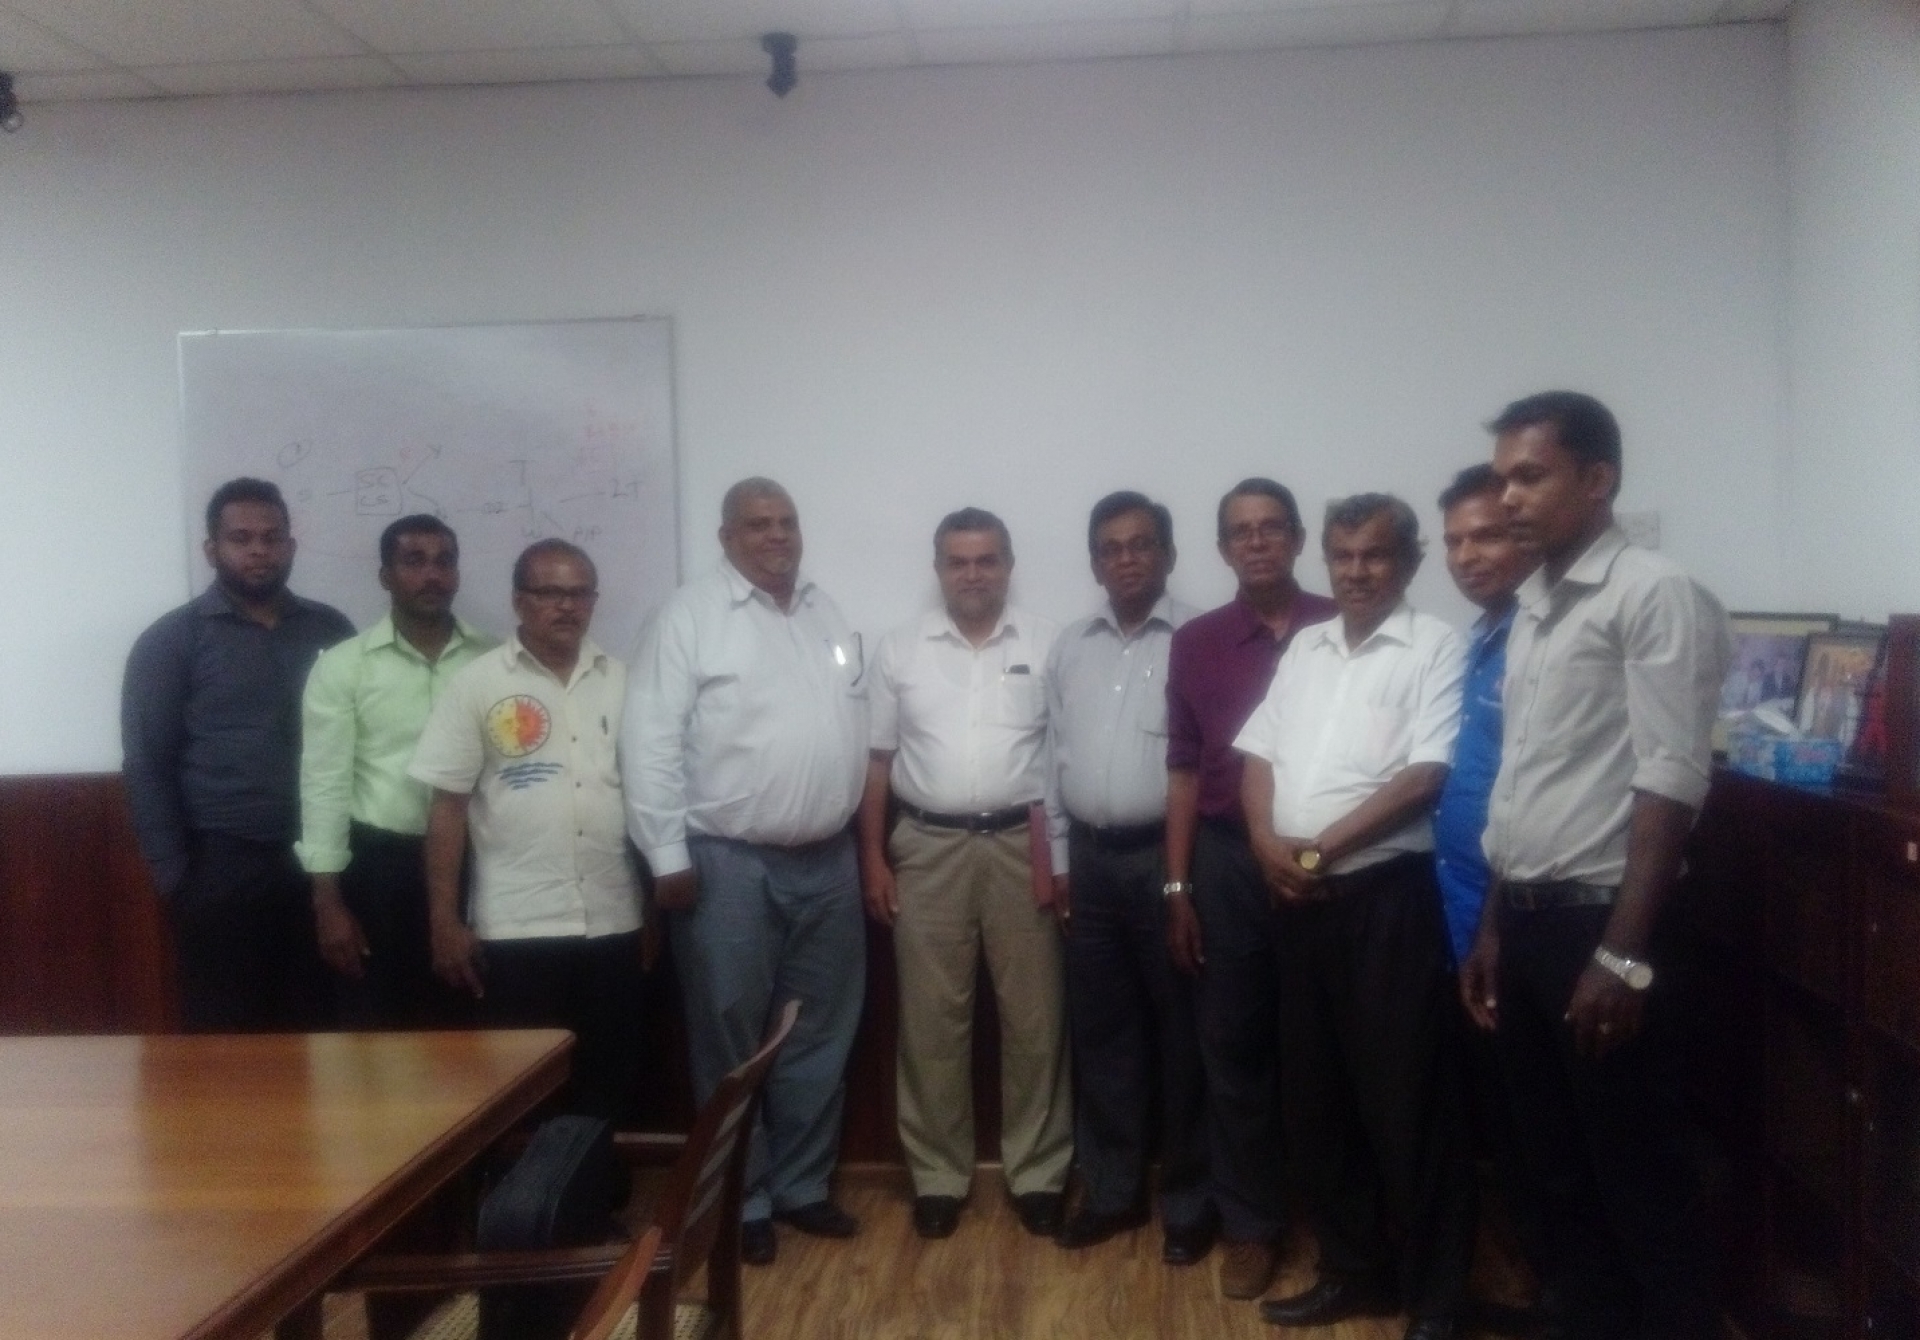 Collective agreement with jss - leather product